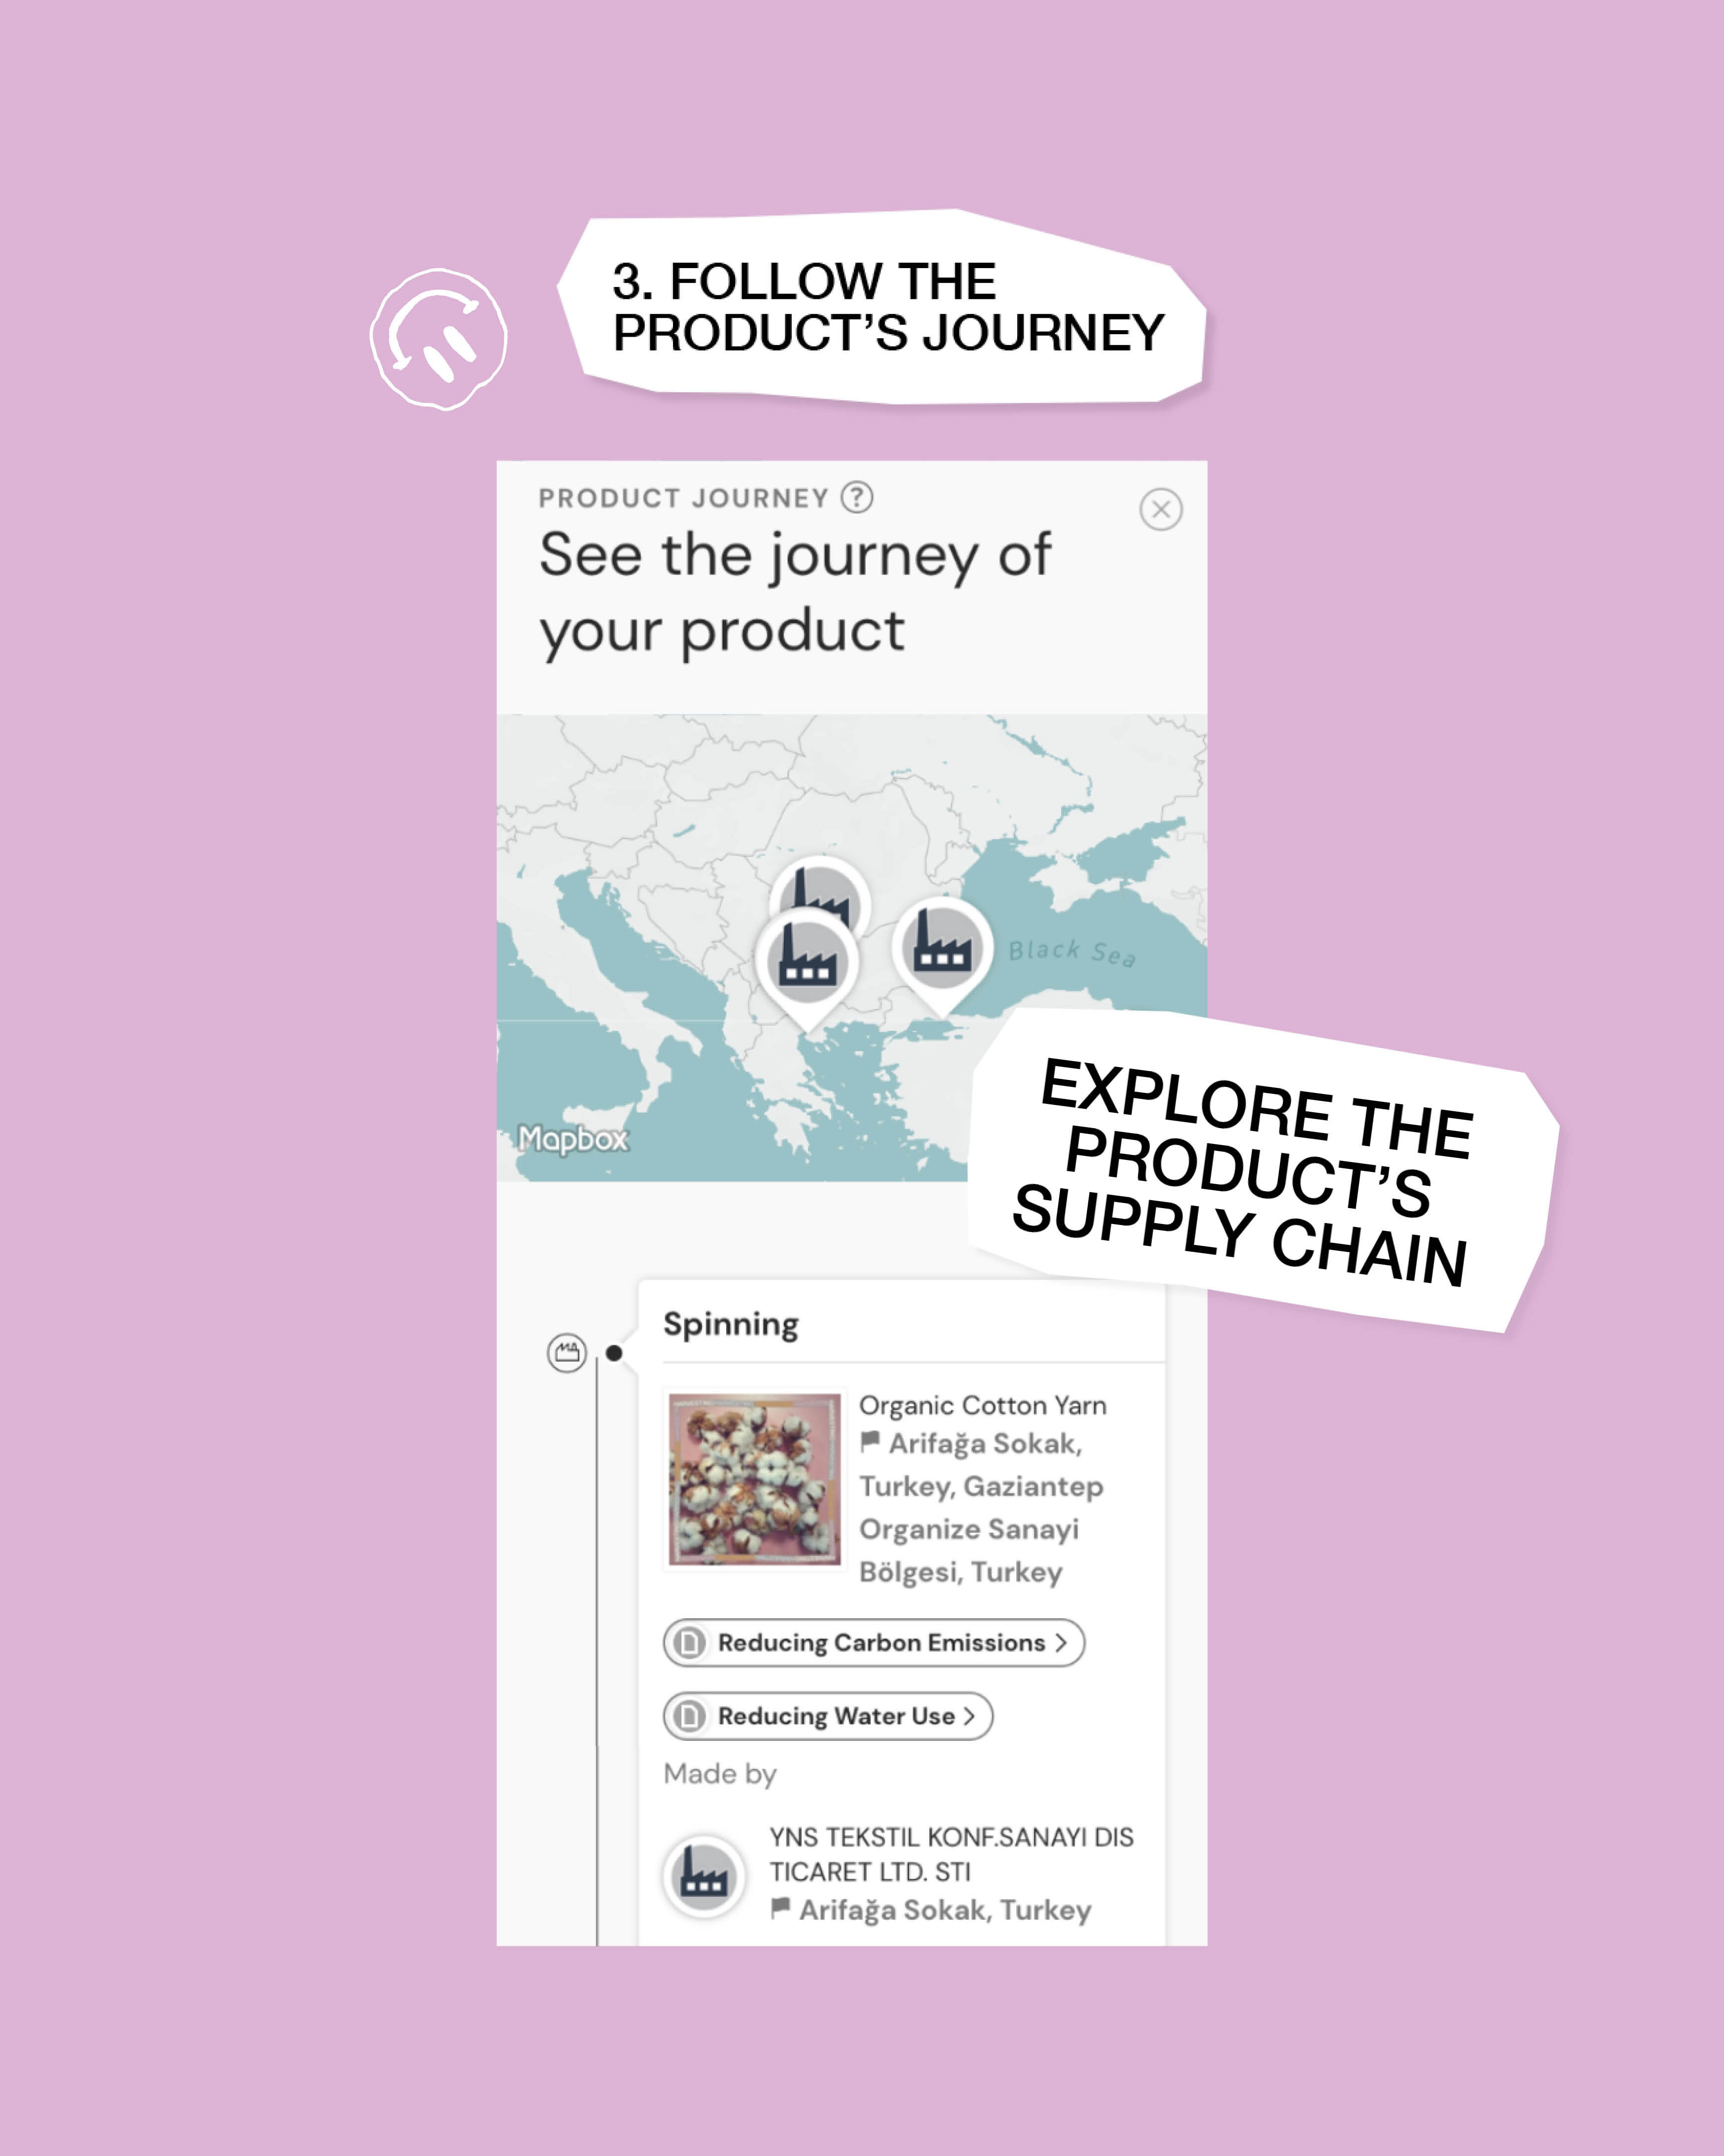 FOLLOW THE PRODUCT JOURNEY